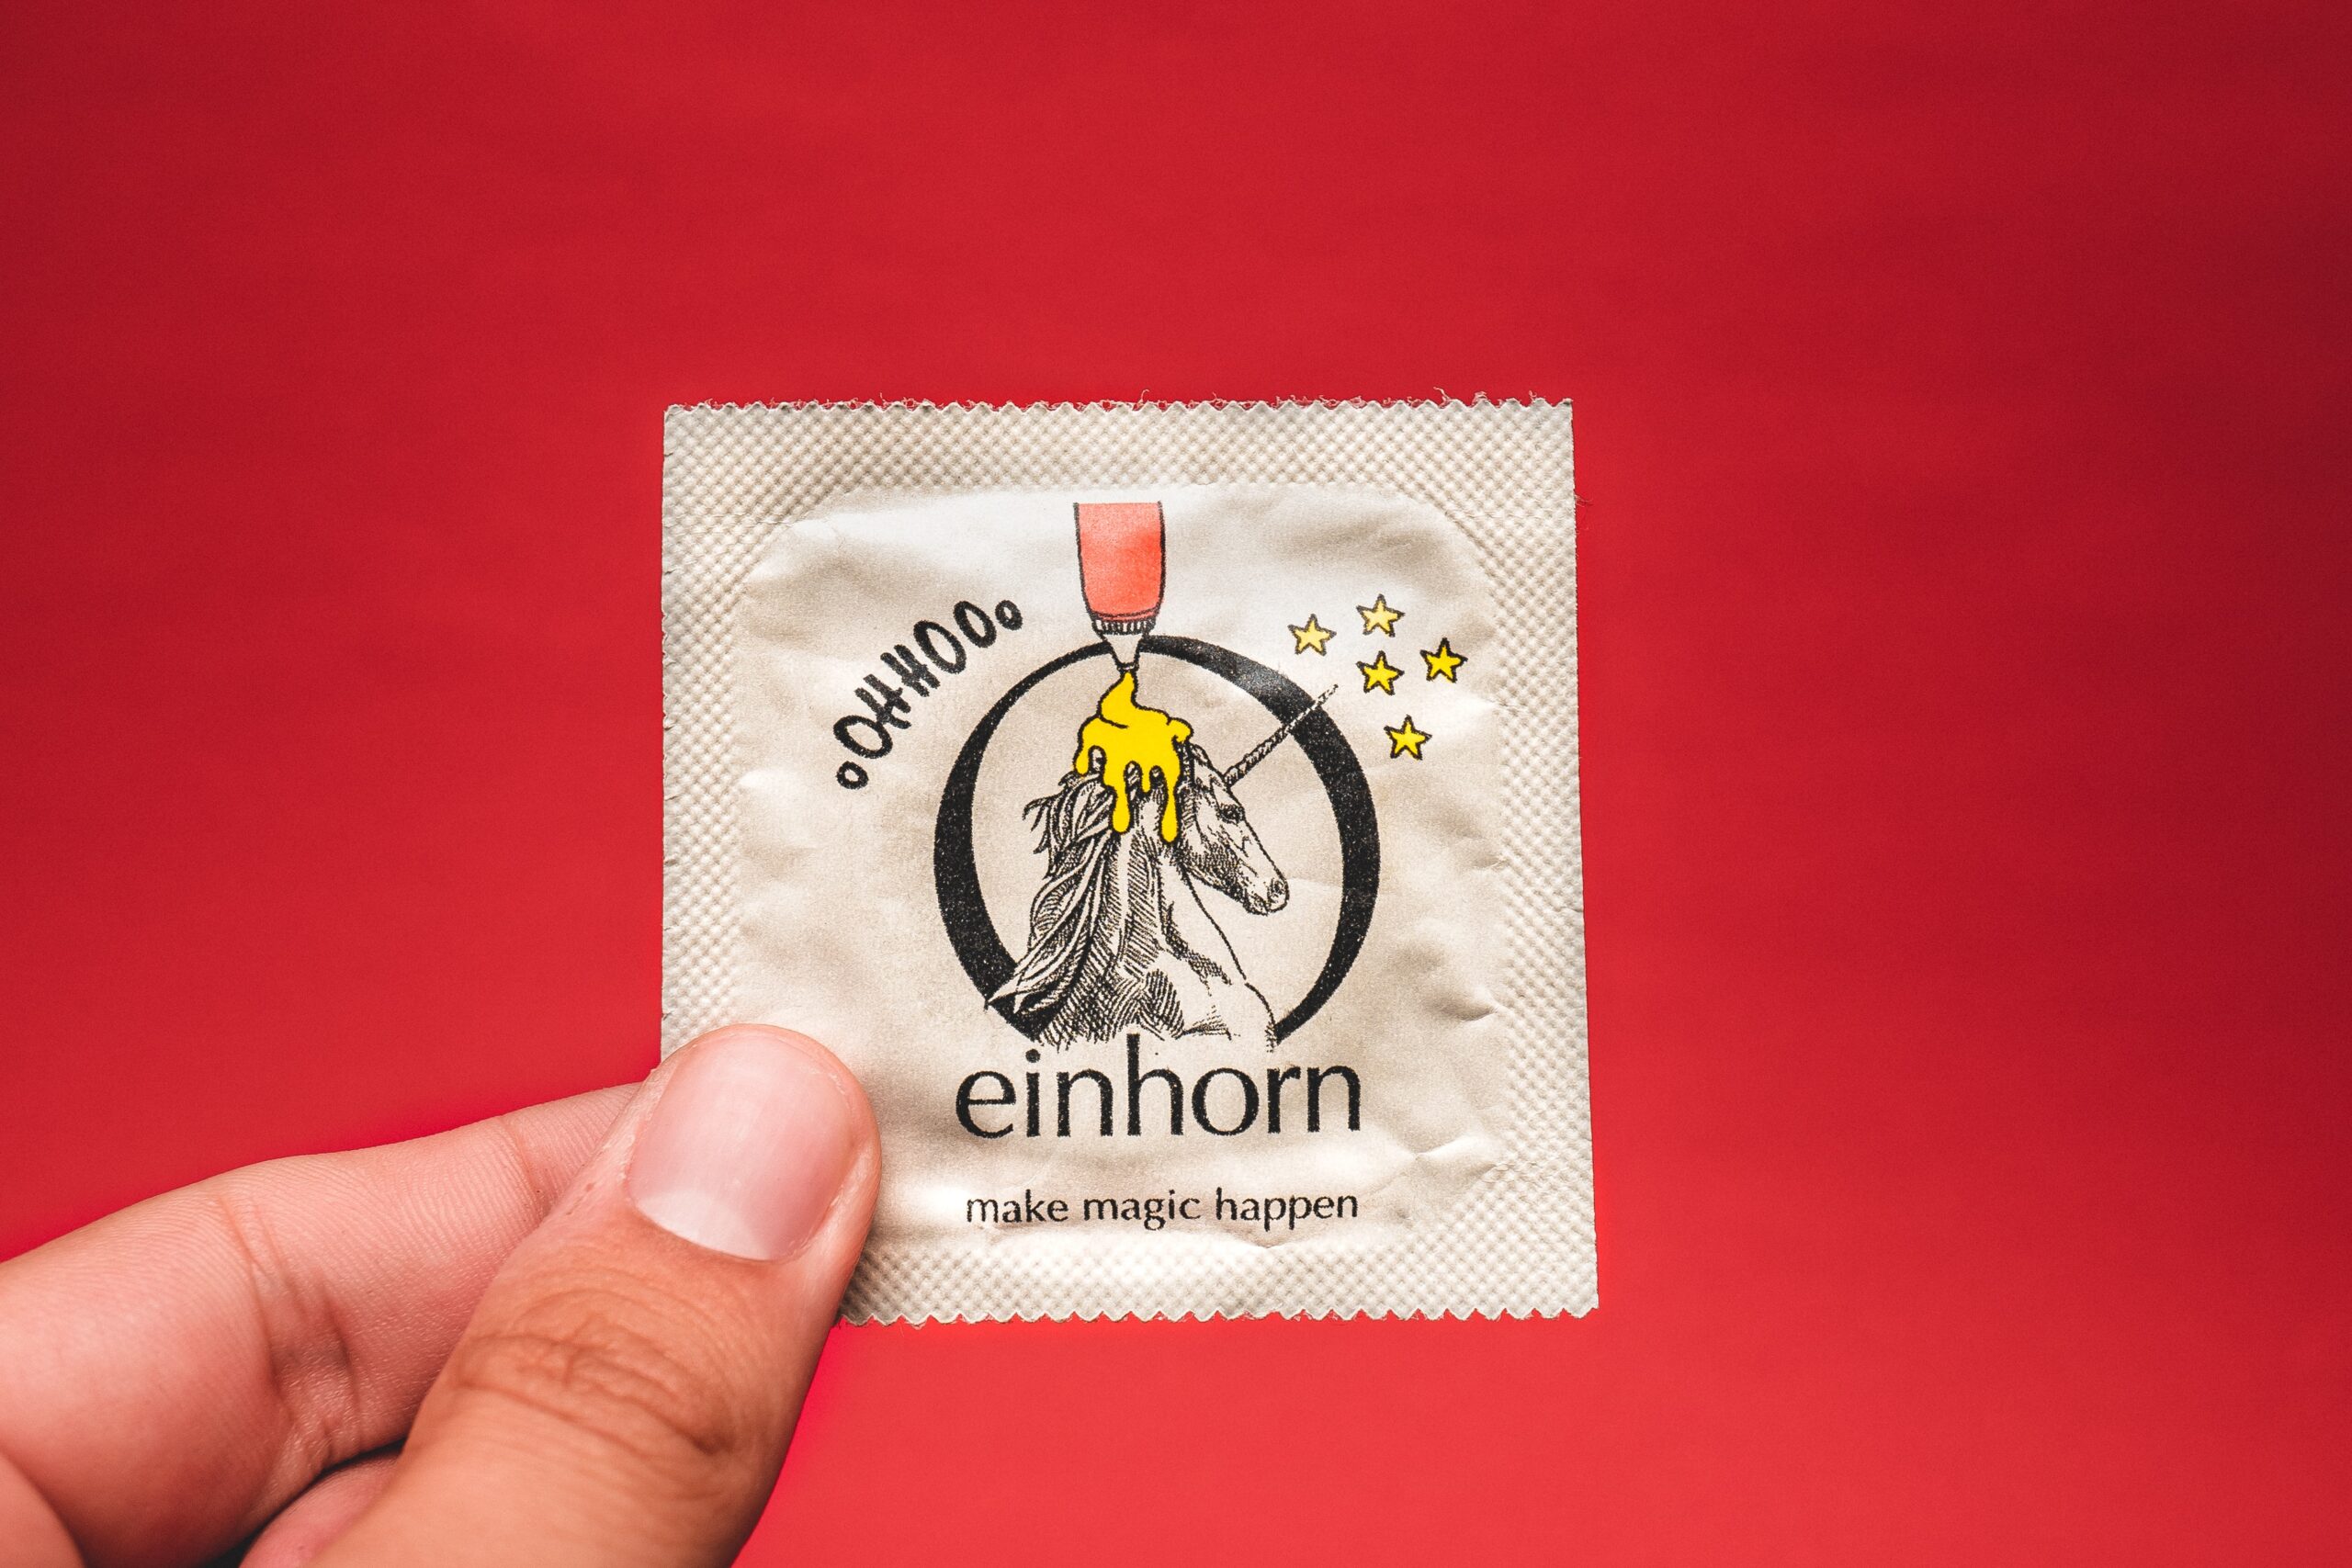 Can Hormonal Birth Control Cause Smelly Urine?